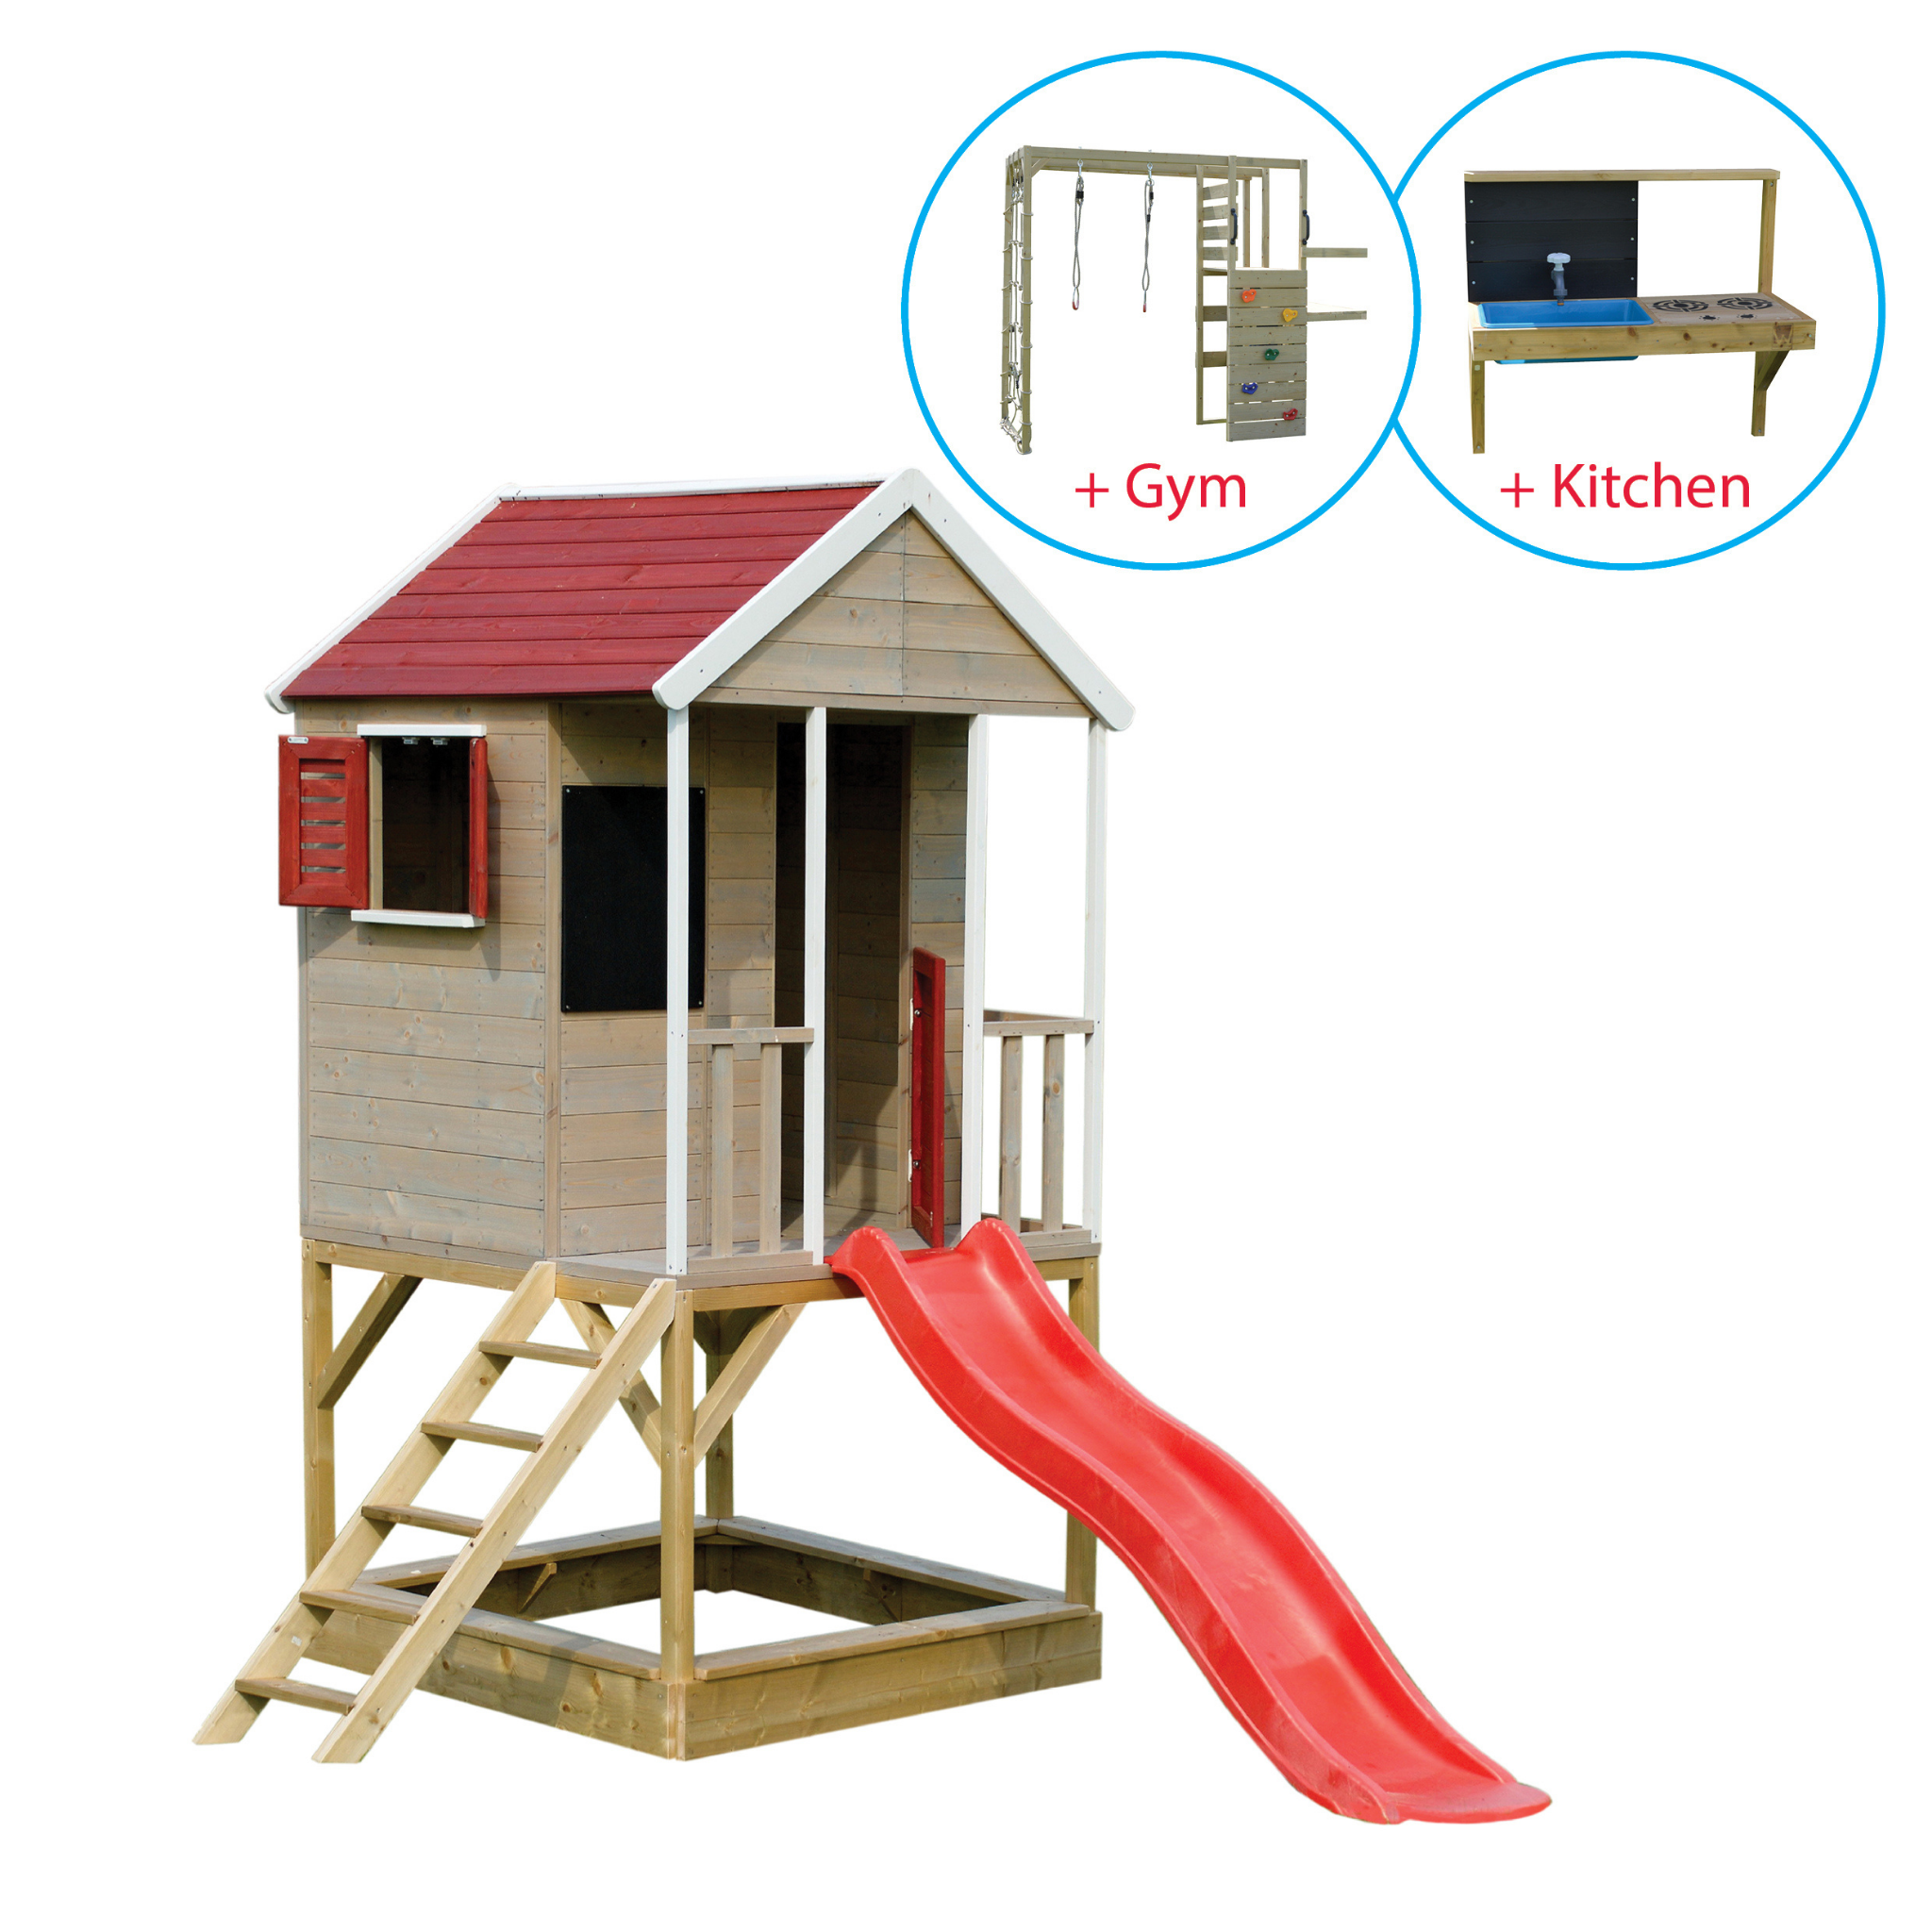 M7R-GK Summer Adventure House with Platform and Slide + Gym and Kitchen Attachment